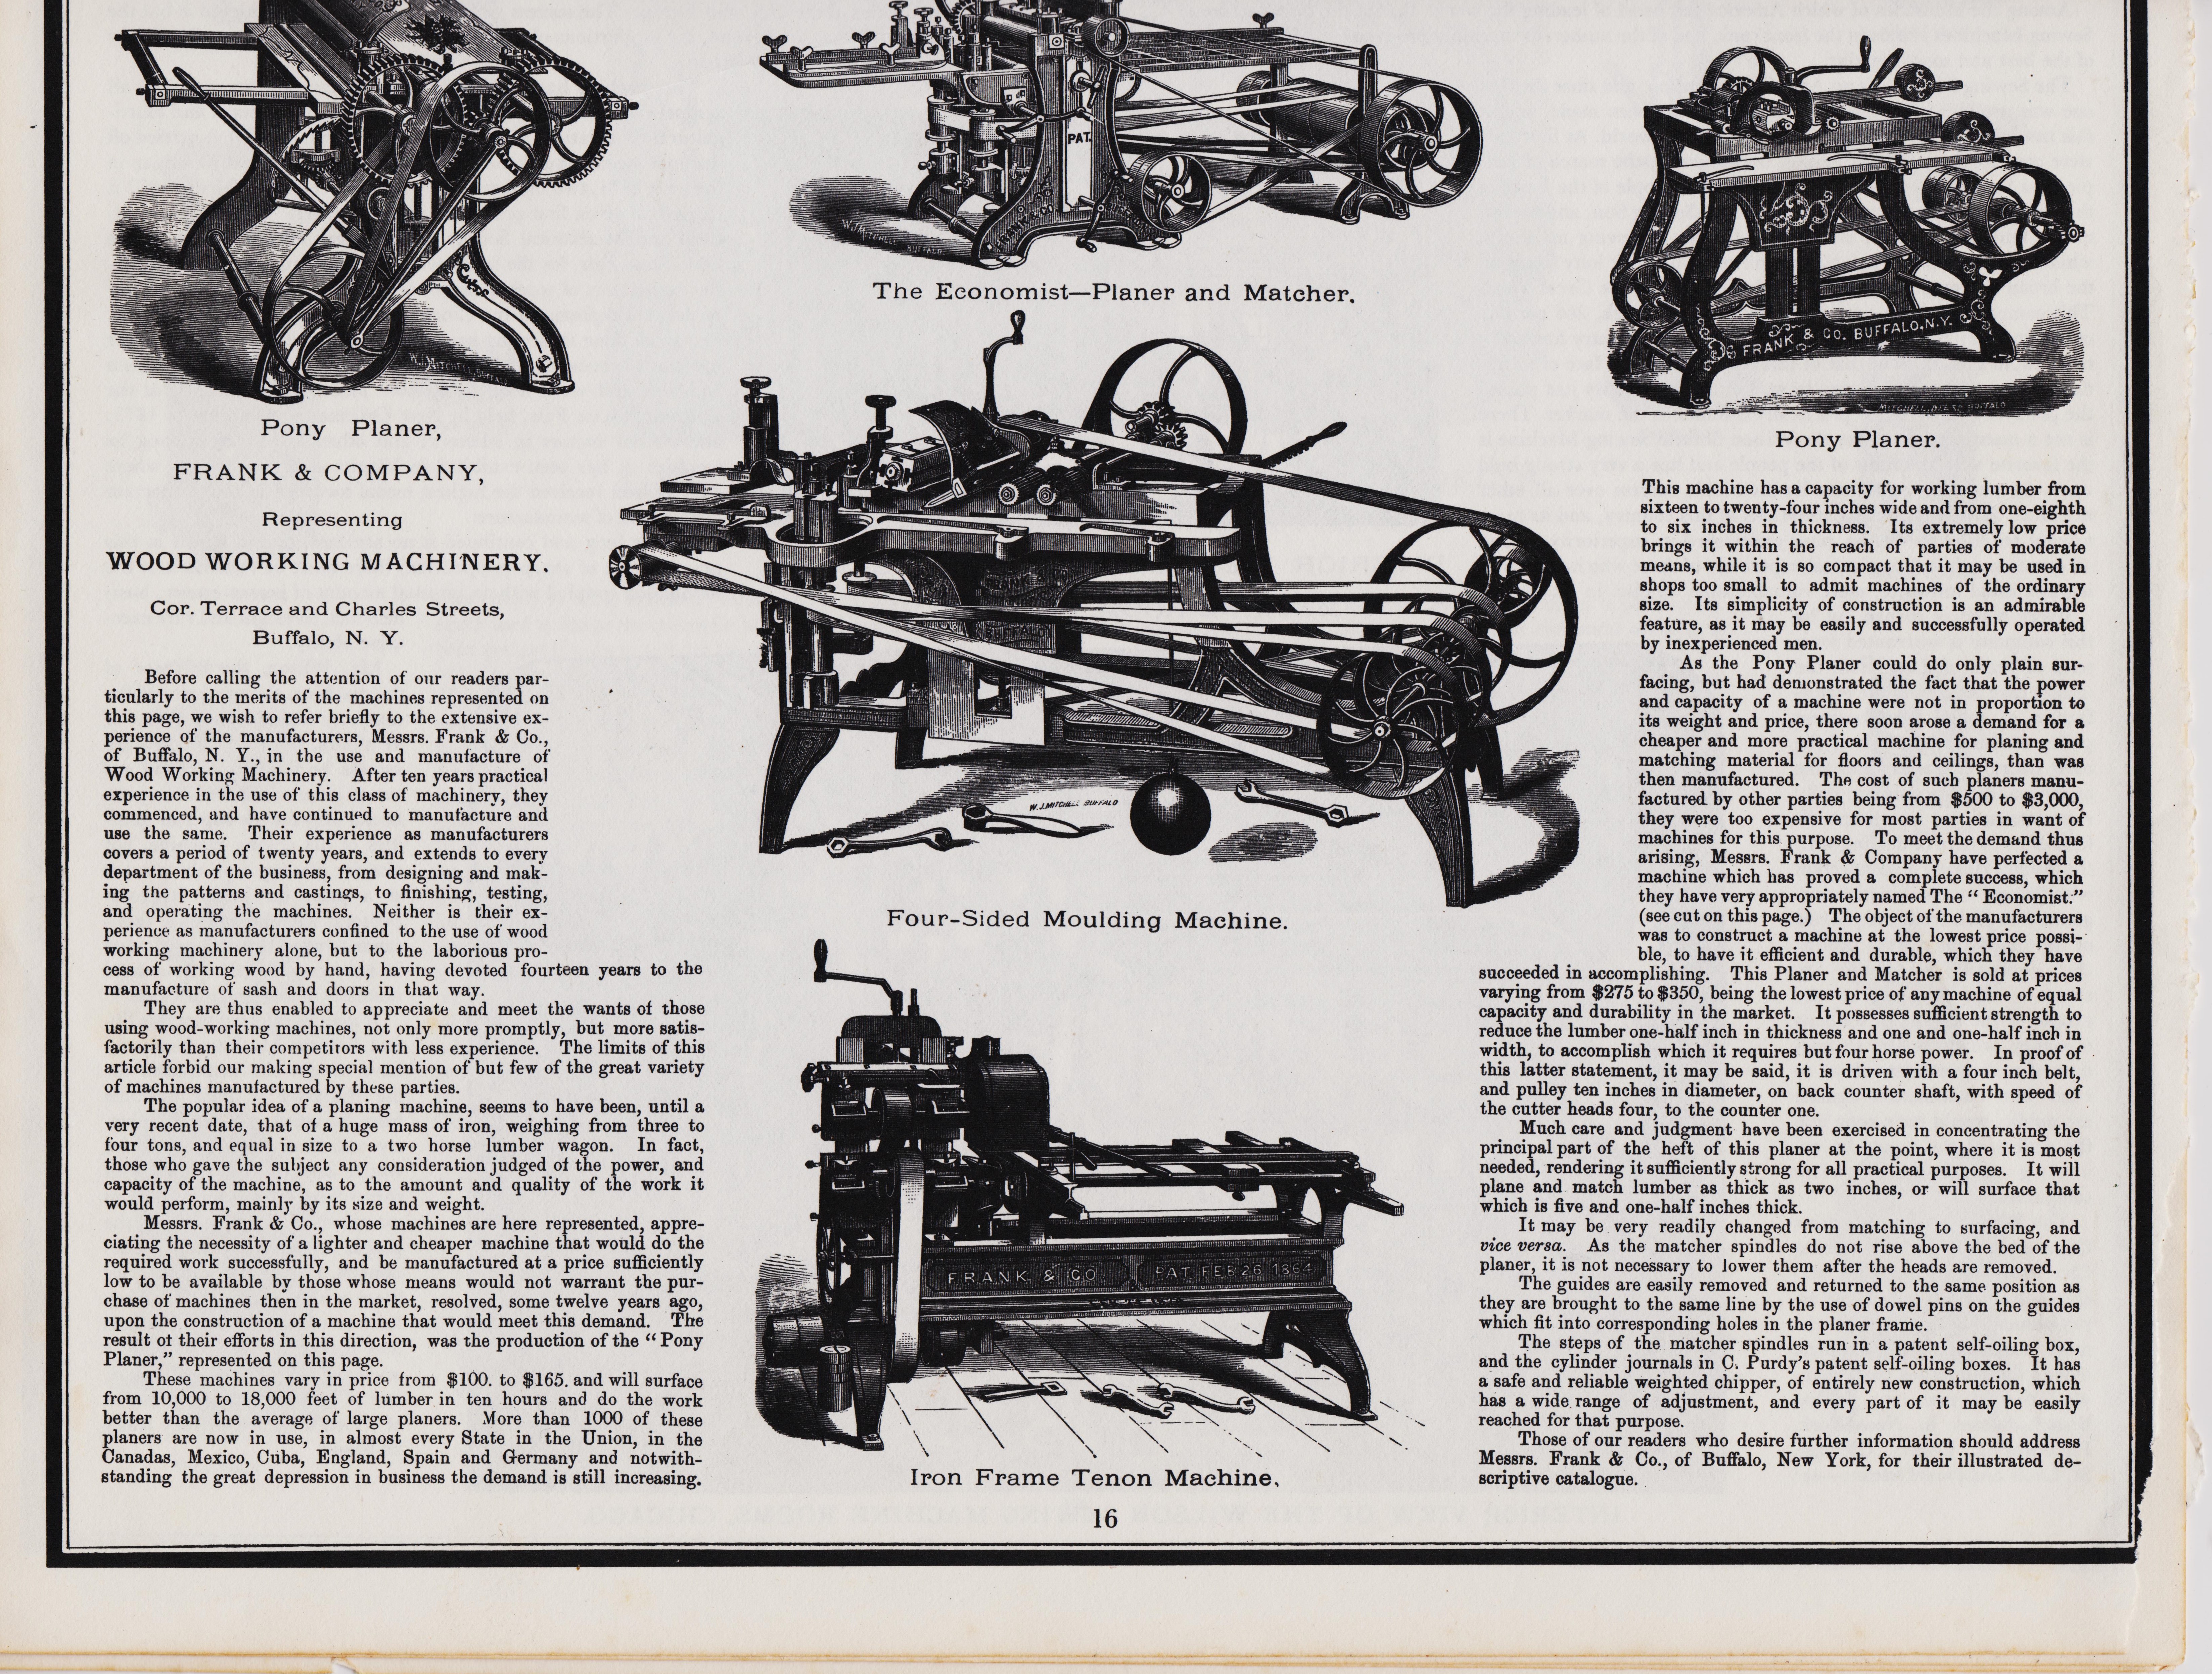 https://antiquemachinery.com/images/1876-Asher-Adams-Pictorial-Album-page-16-bot-Frank-and-company-Wood-working-Machinery.jpg